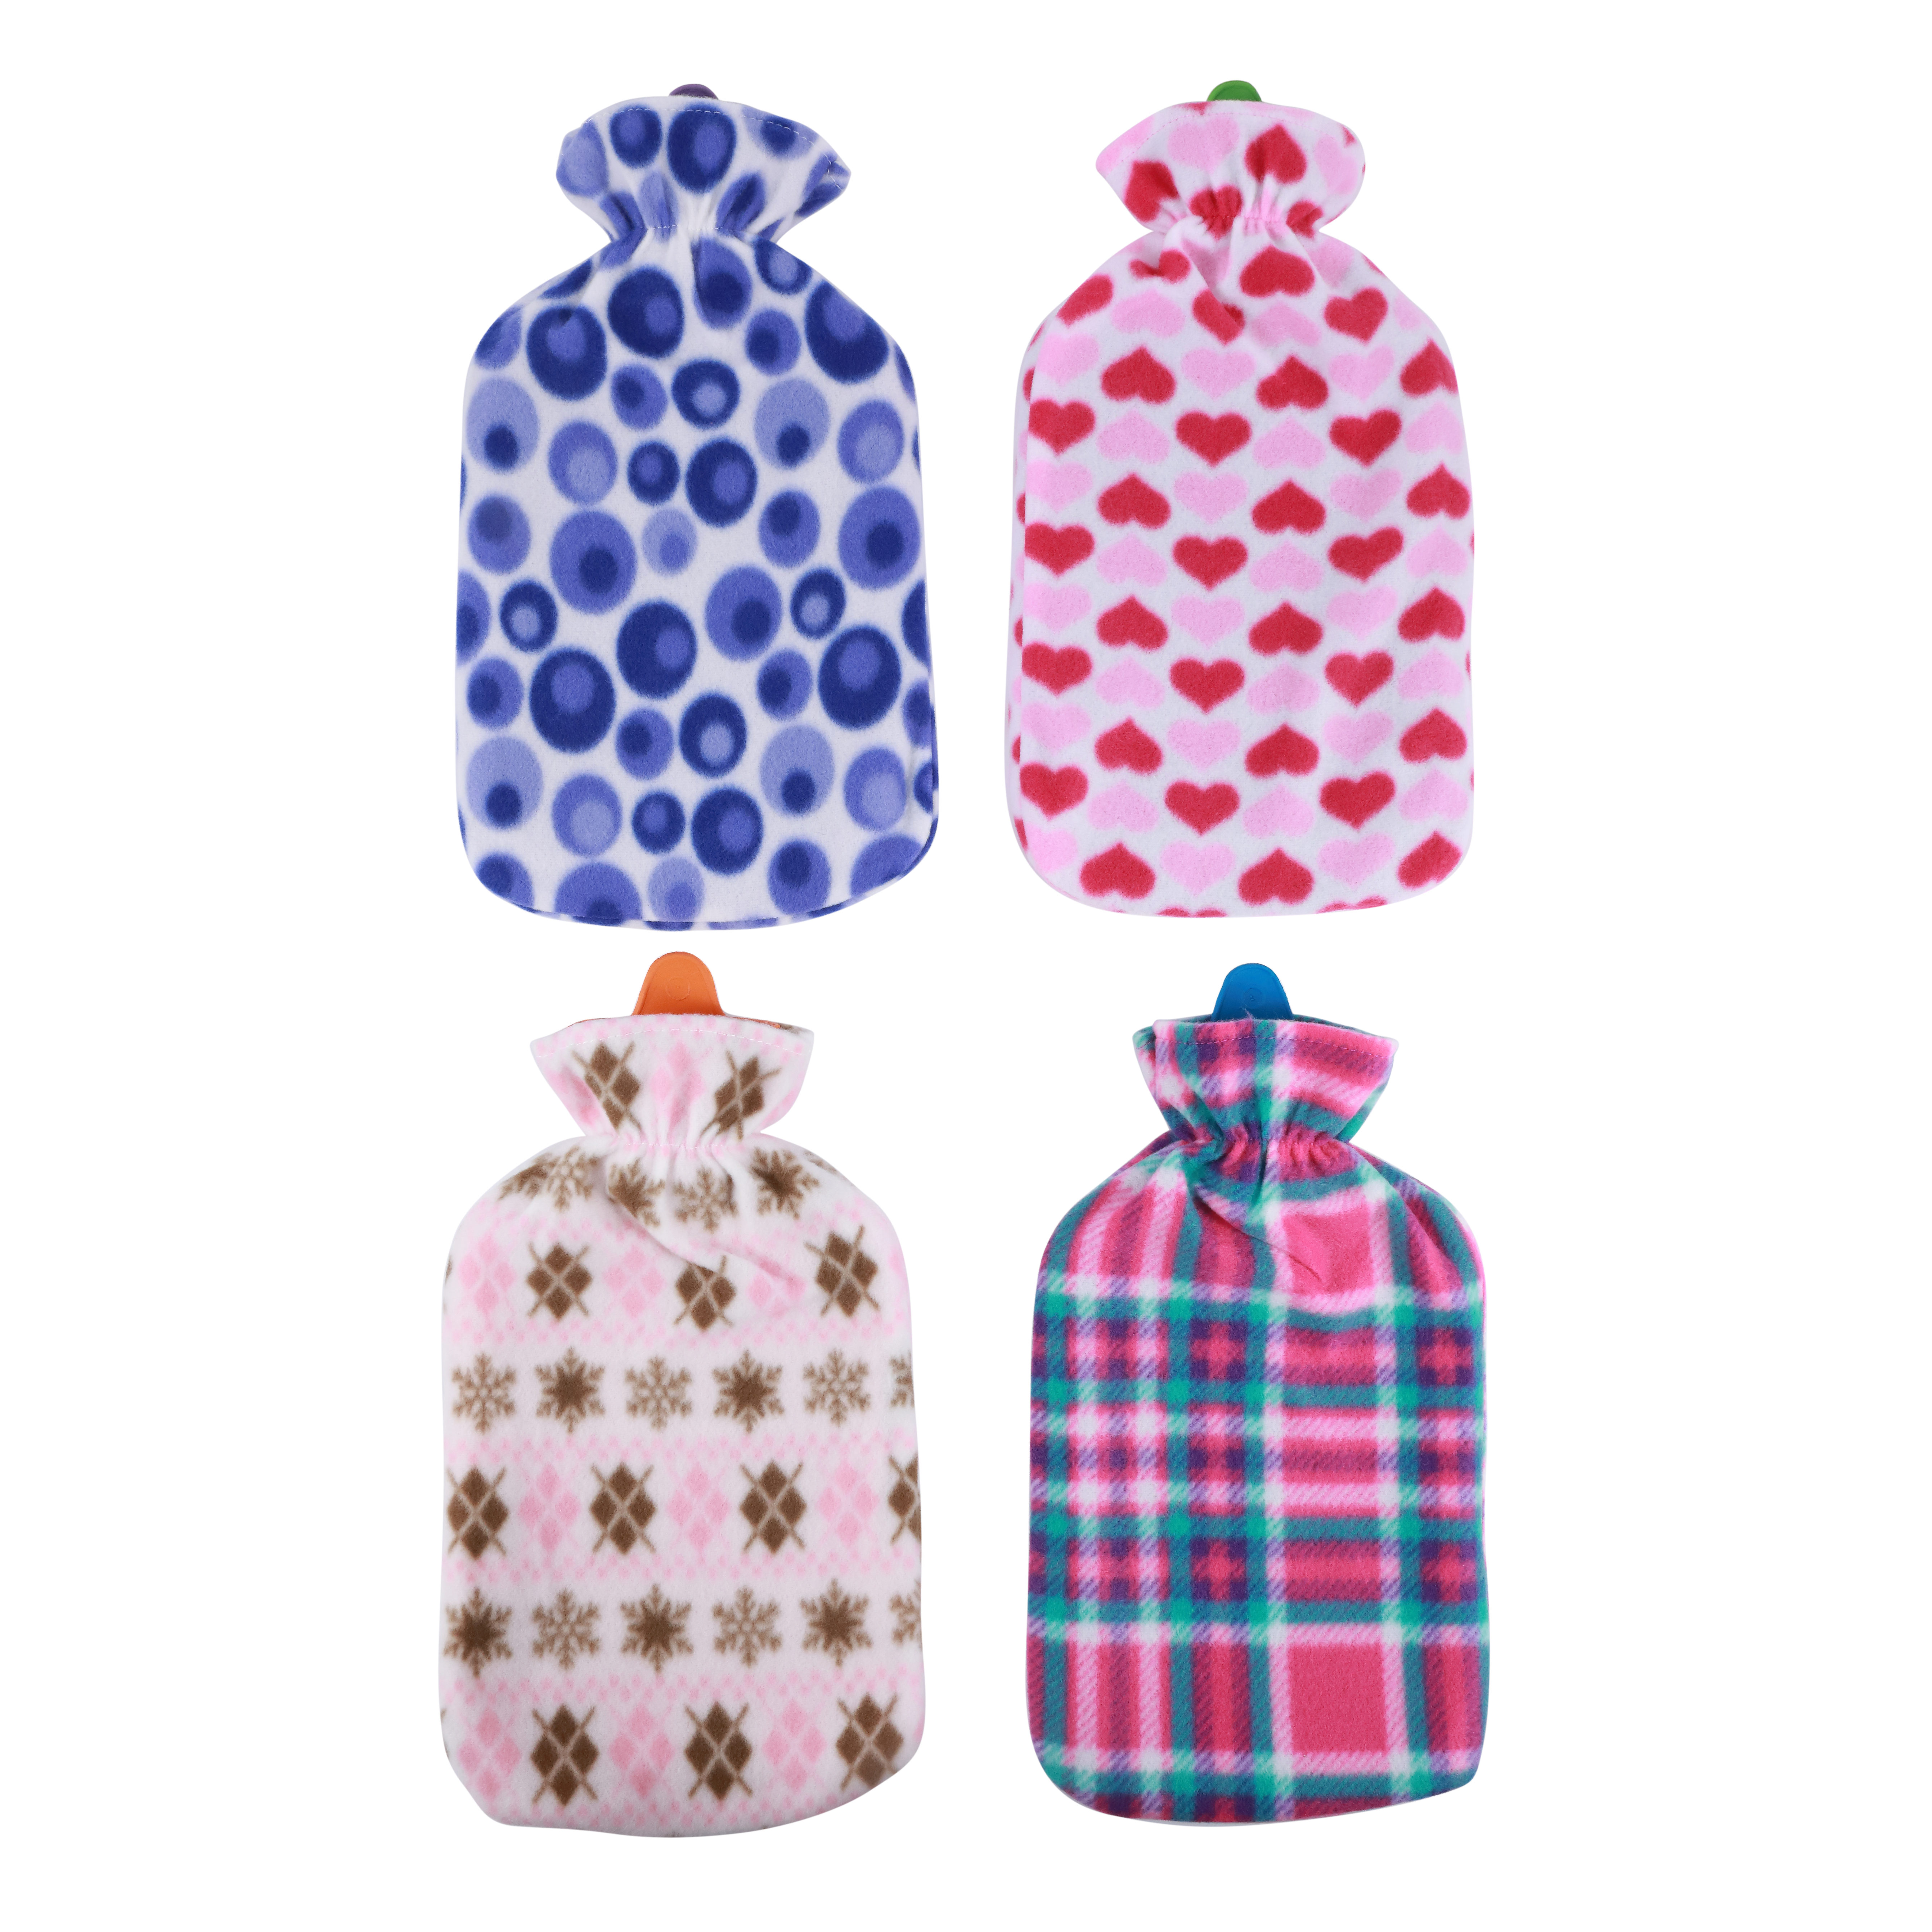 Hot Water Bottle with Soft Fleece Cover Hand Pocket